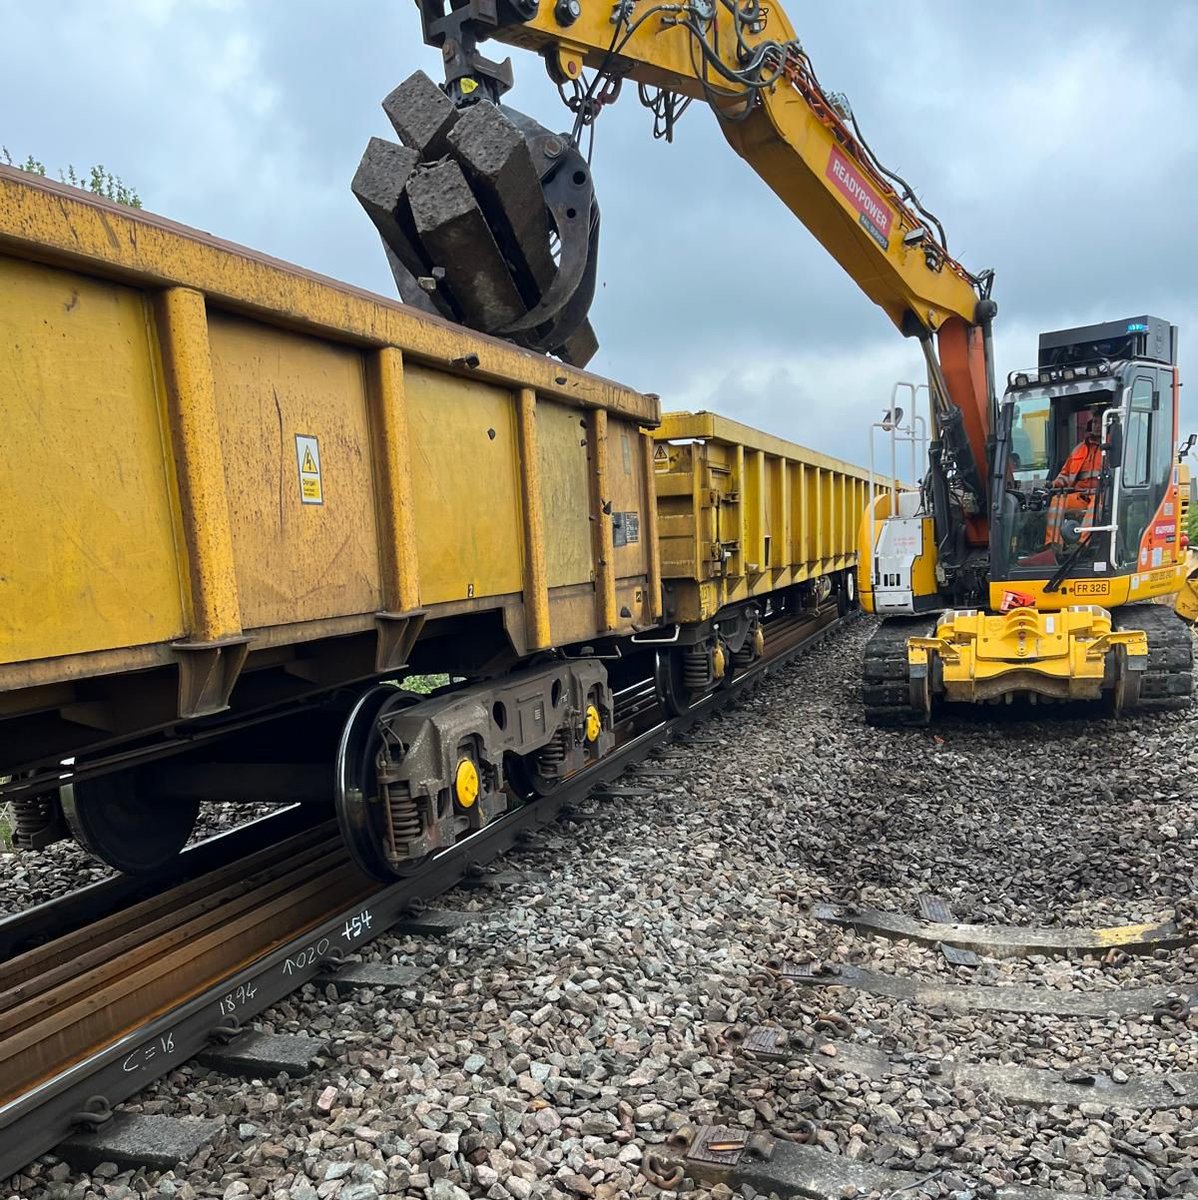 🚧 It’s the final day of the four-week upgrades taking place between Leeds and Huddersfield as part of #TRU. 🛤 Over the past month, a total of 3000m of new track has been installed, while work has been carried out on over 13,000m of cable as part of signalling upgrades. 🚆